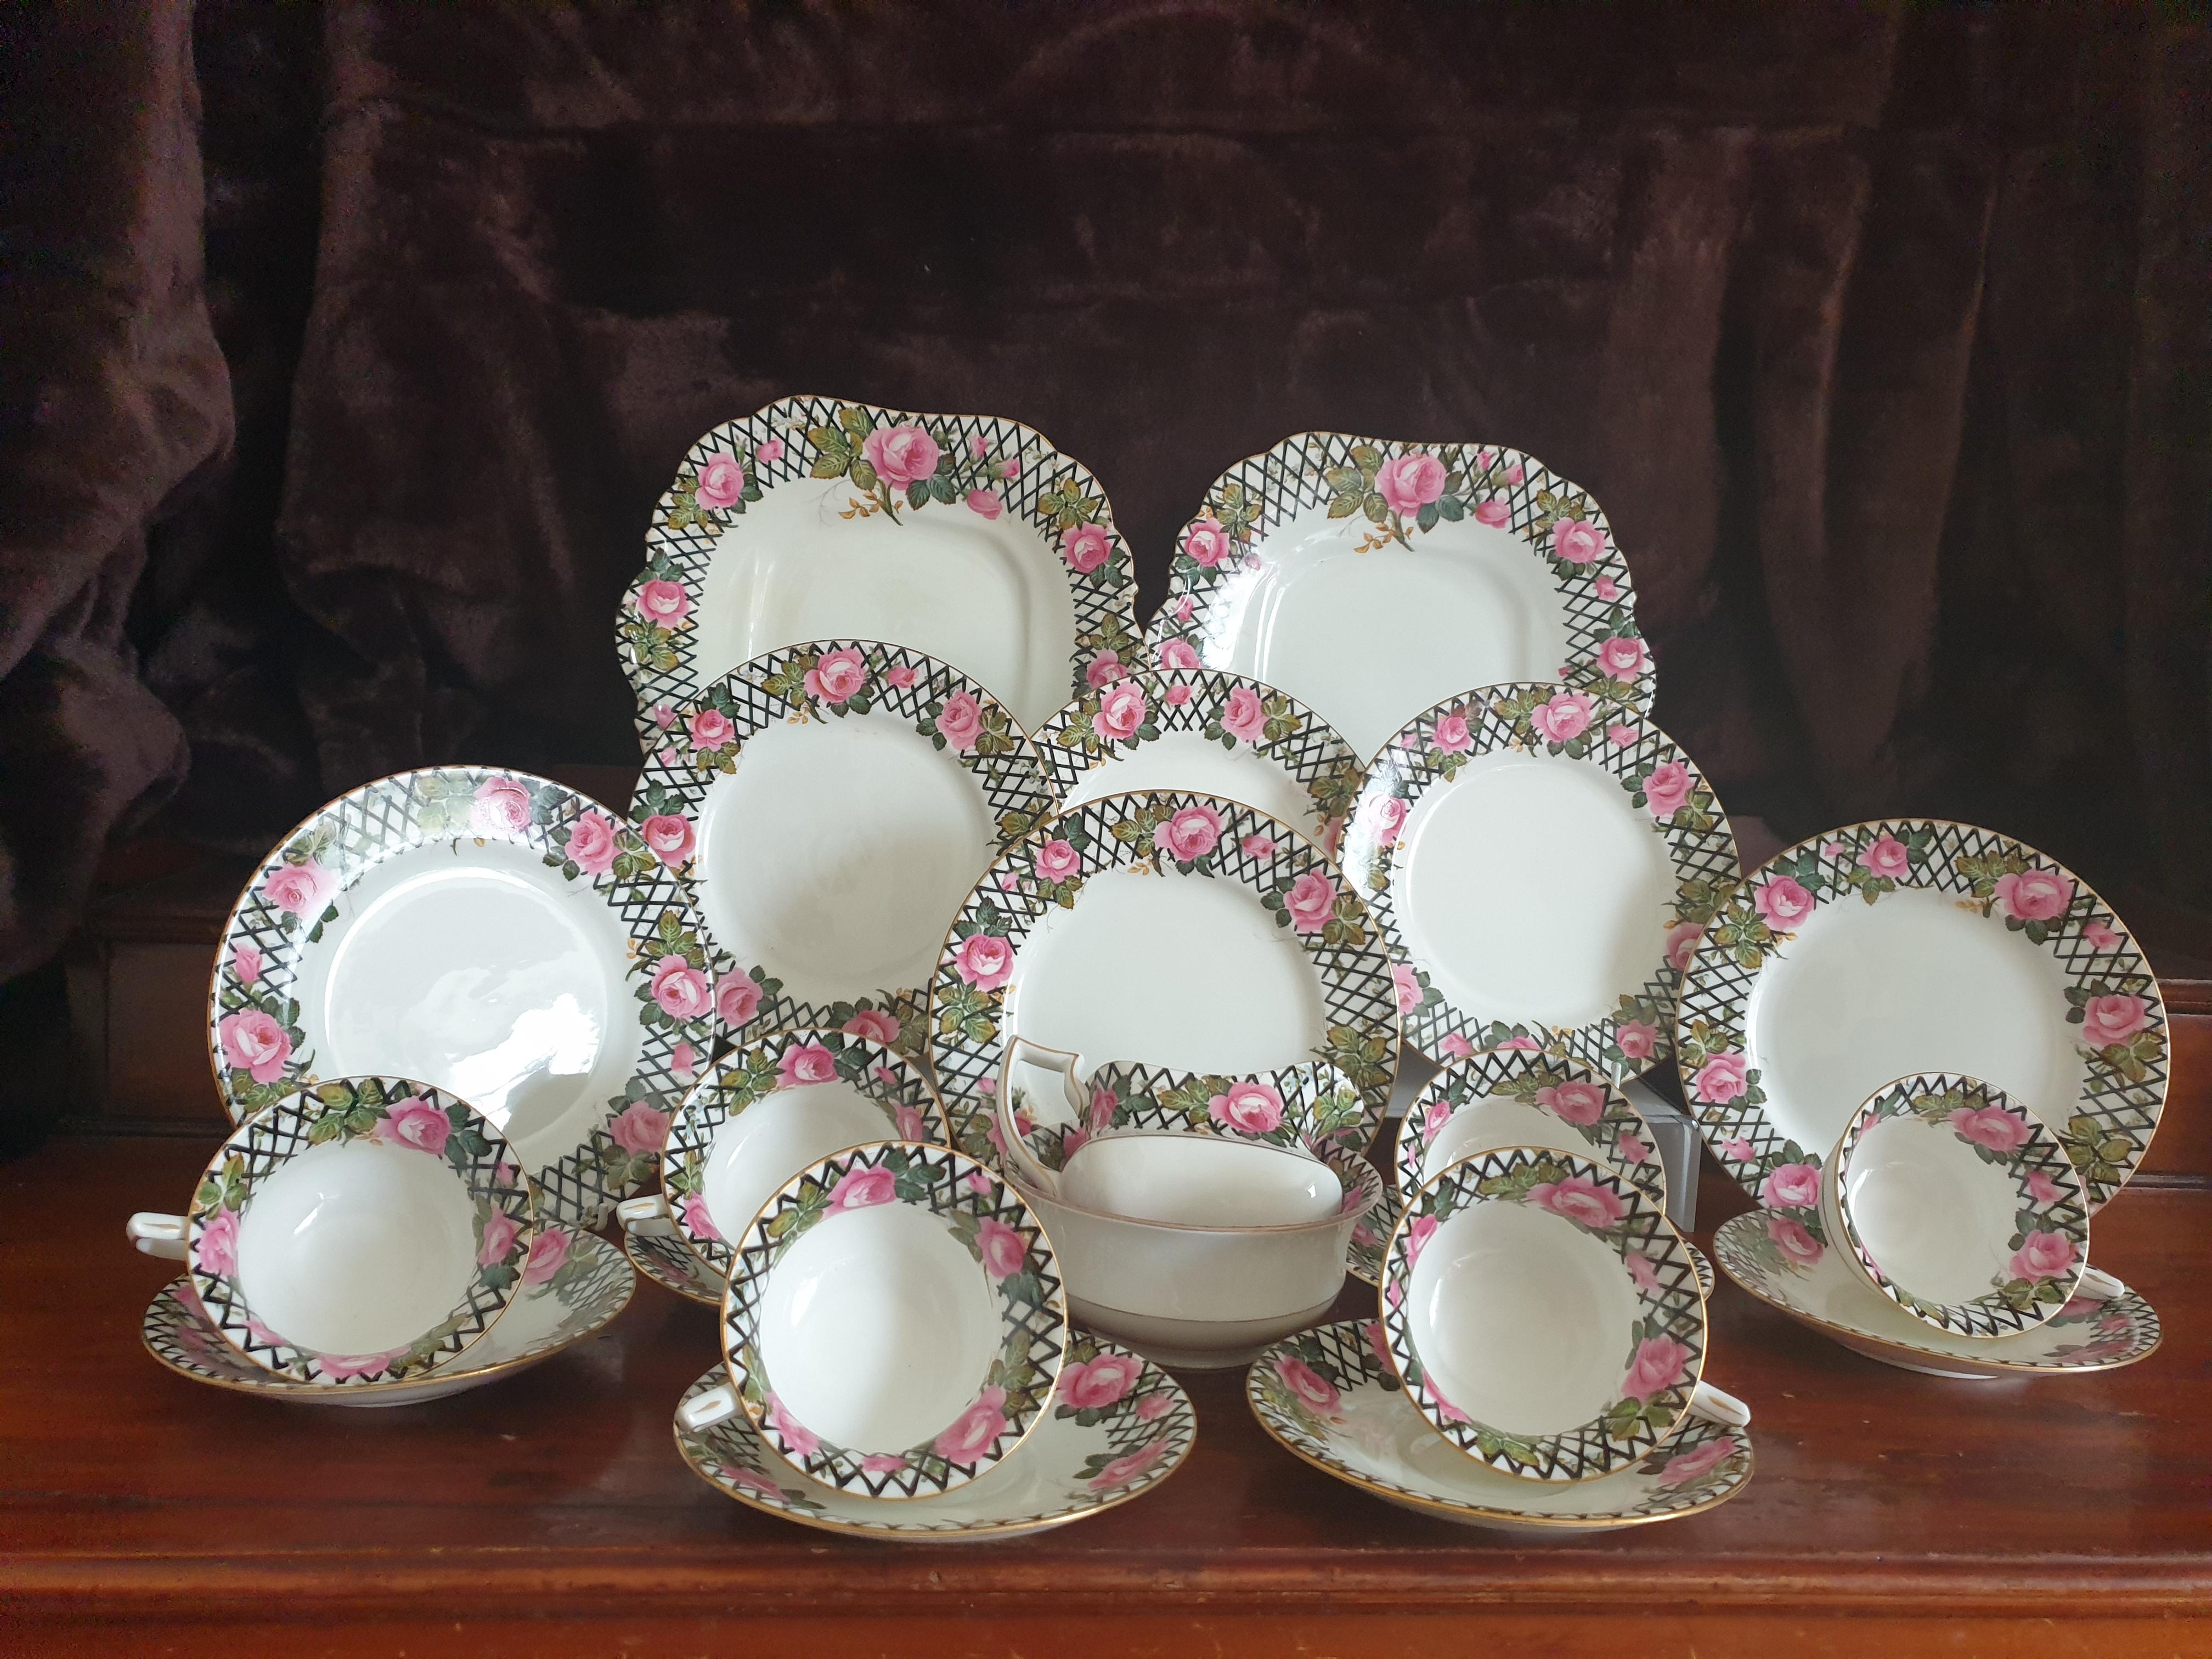 An early 20th century Aynsley Art Deco Roses tea service comprising of 6 cups, 6 saucers, 6 cake plates, sugar bowl, creamer and 2 large cakeplates. The Tea Service is decorated with handpainted pink roses set behind a fence. 
Makers stamp to the